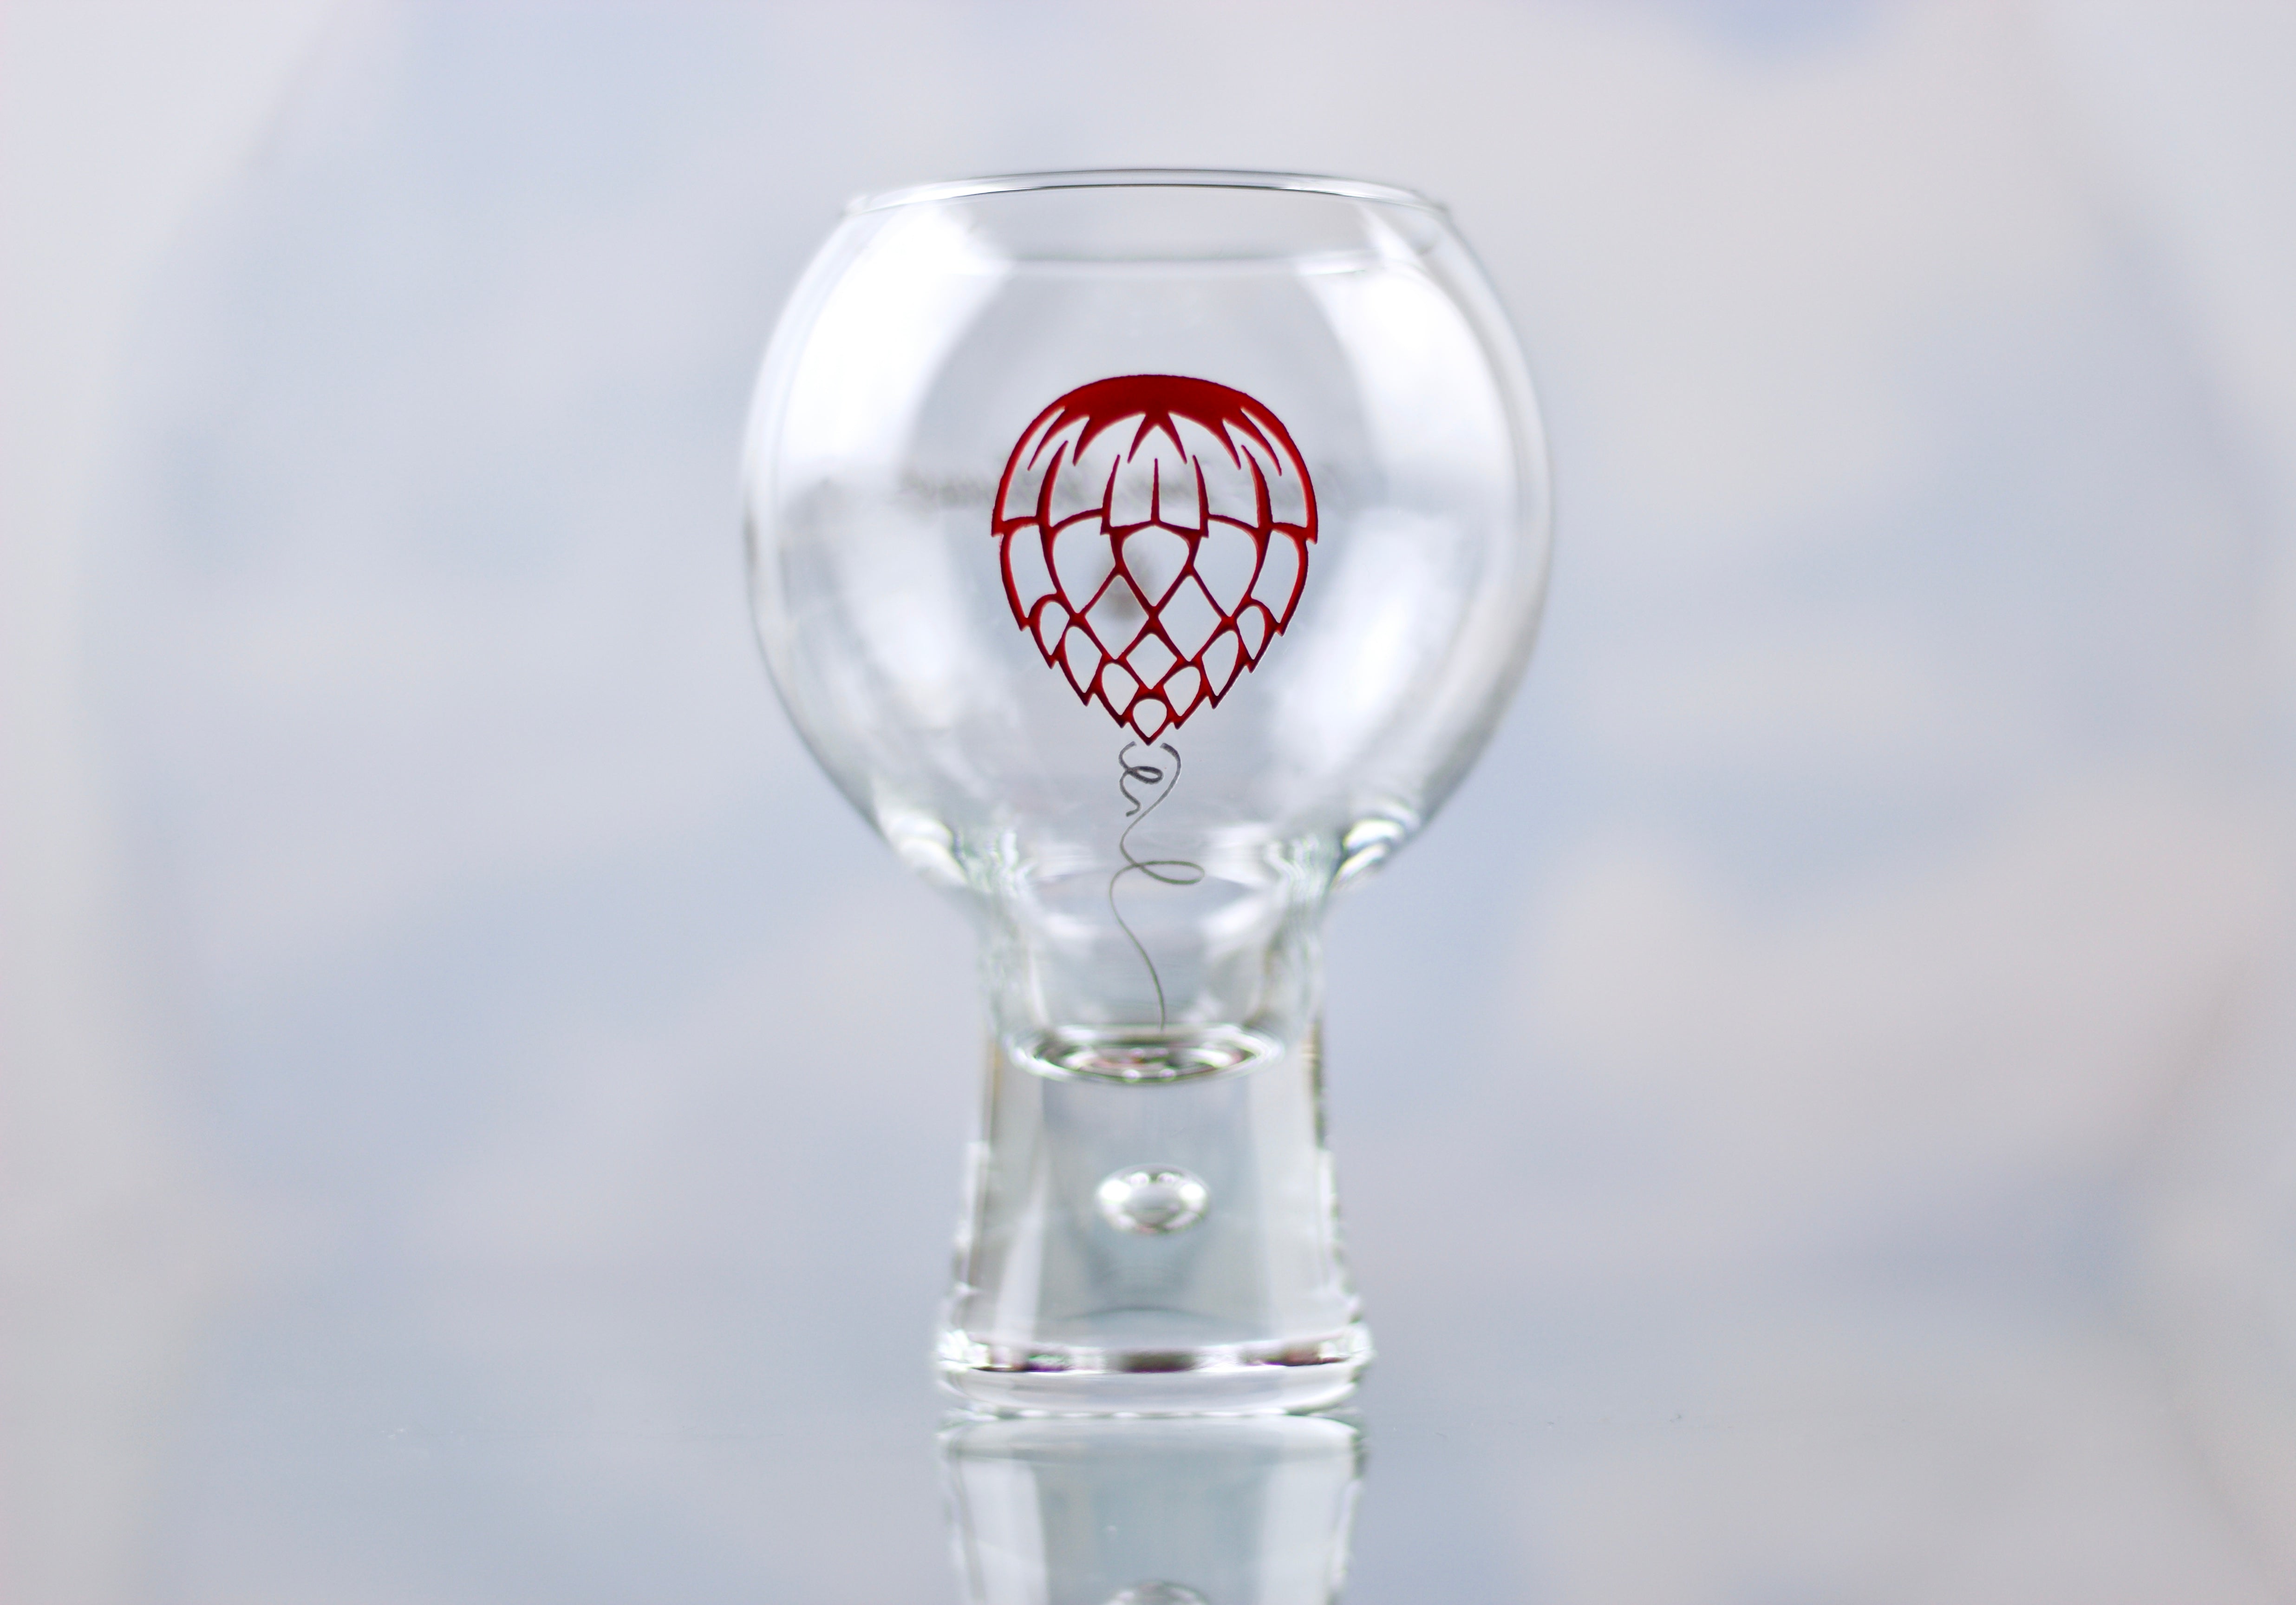 The Lil' Balloon Glass